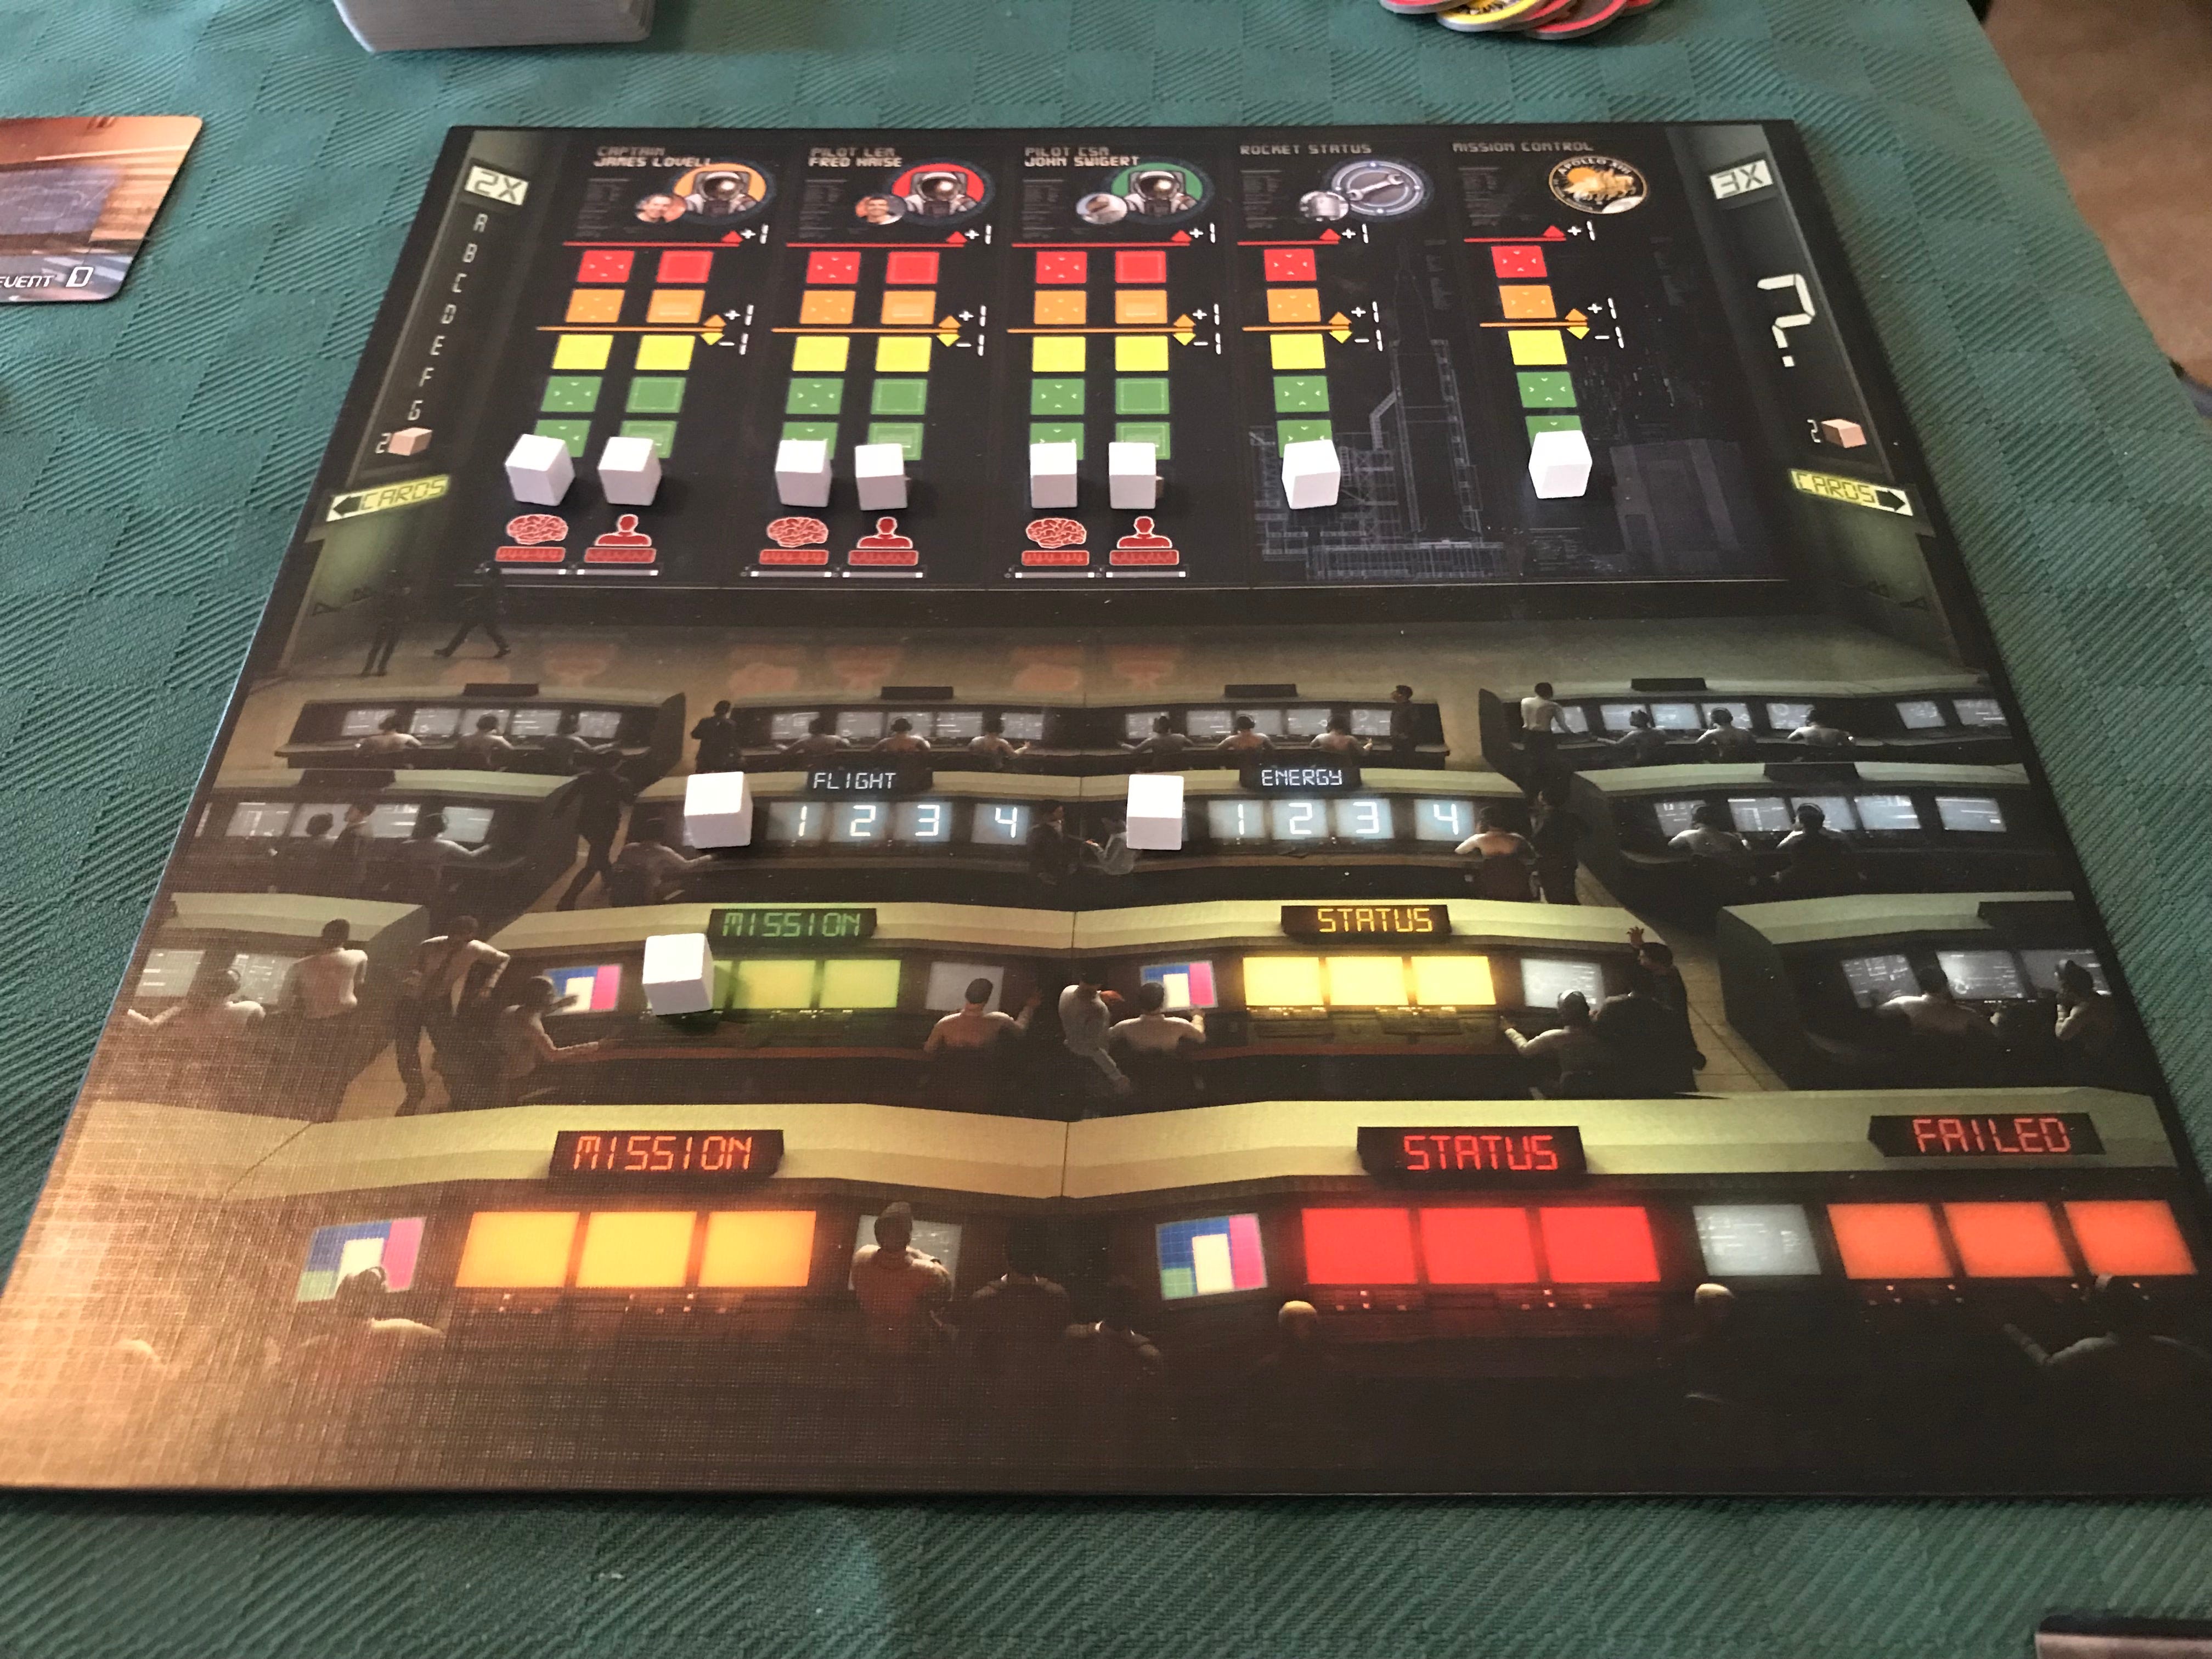 Apollo Xiii The Board Game Who Knew Mission Failure Could Be So Much Fun By Martin Gonzalvez Medium - all 3 endings in airplane 2 roblox